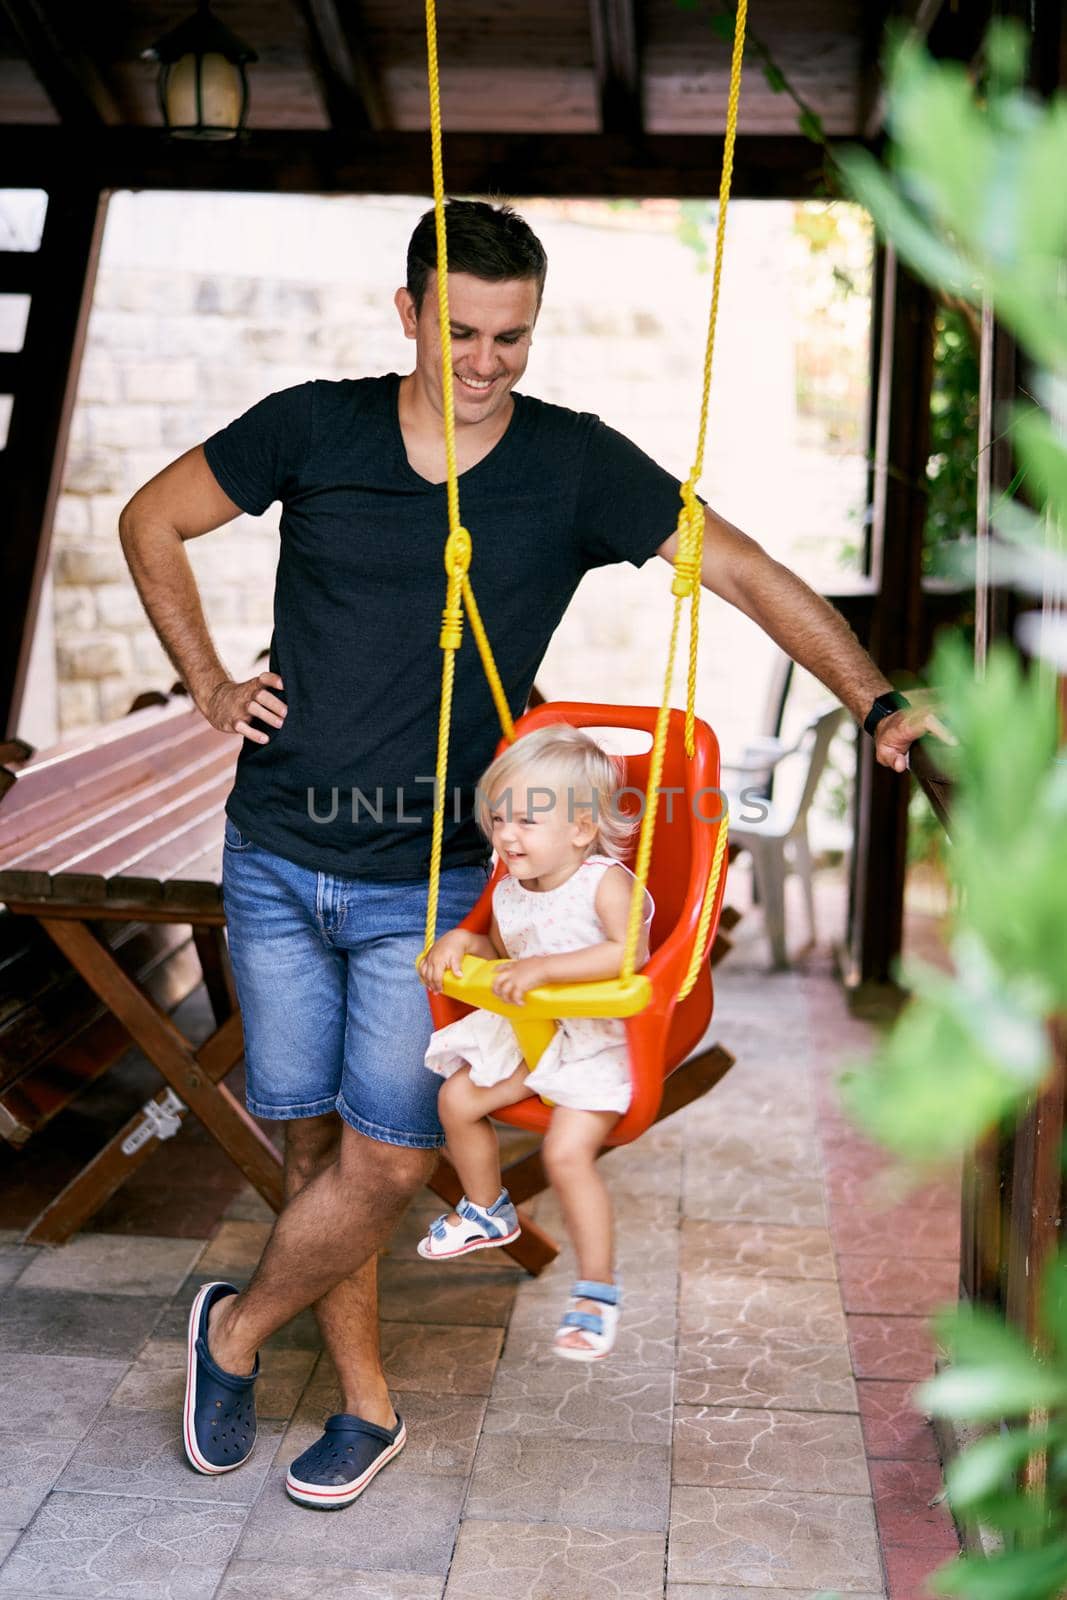 Smiling dad stands near a little girl on a swing in a wooden gazebo by Nadtochiy